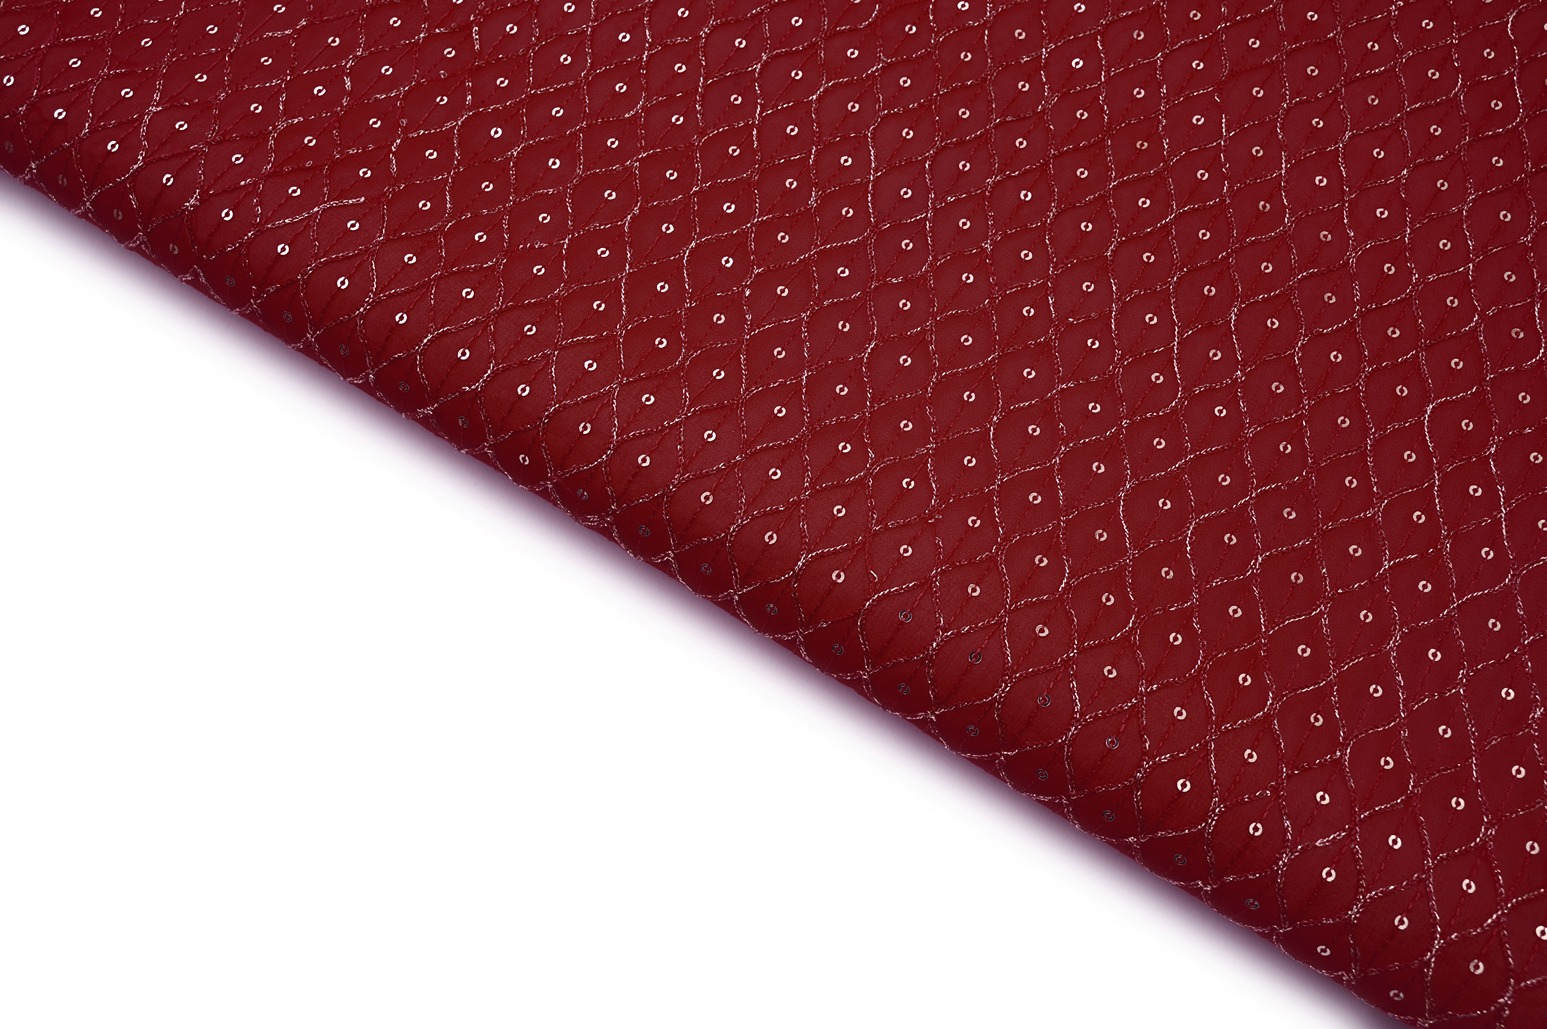 LIPSTIC RED COLOR METALIC DORI WEAVE CHAIN & SEQUANCE PATTERN EMBROIDERED WORK FABRIC 10533